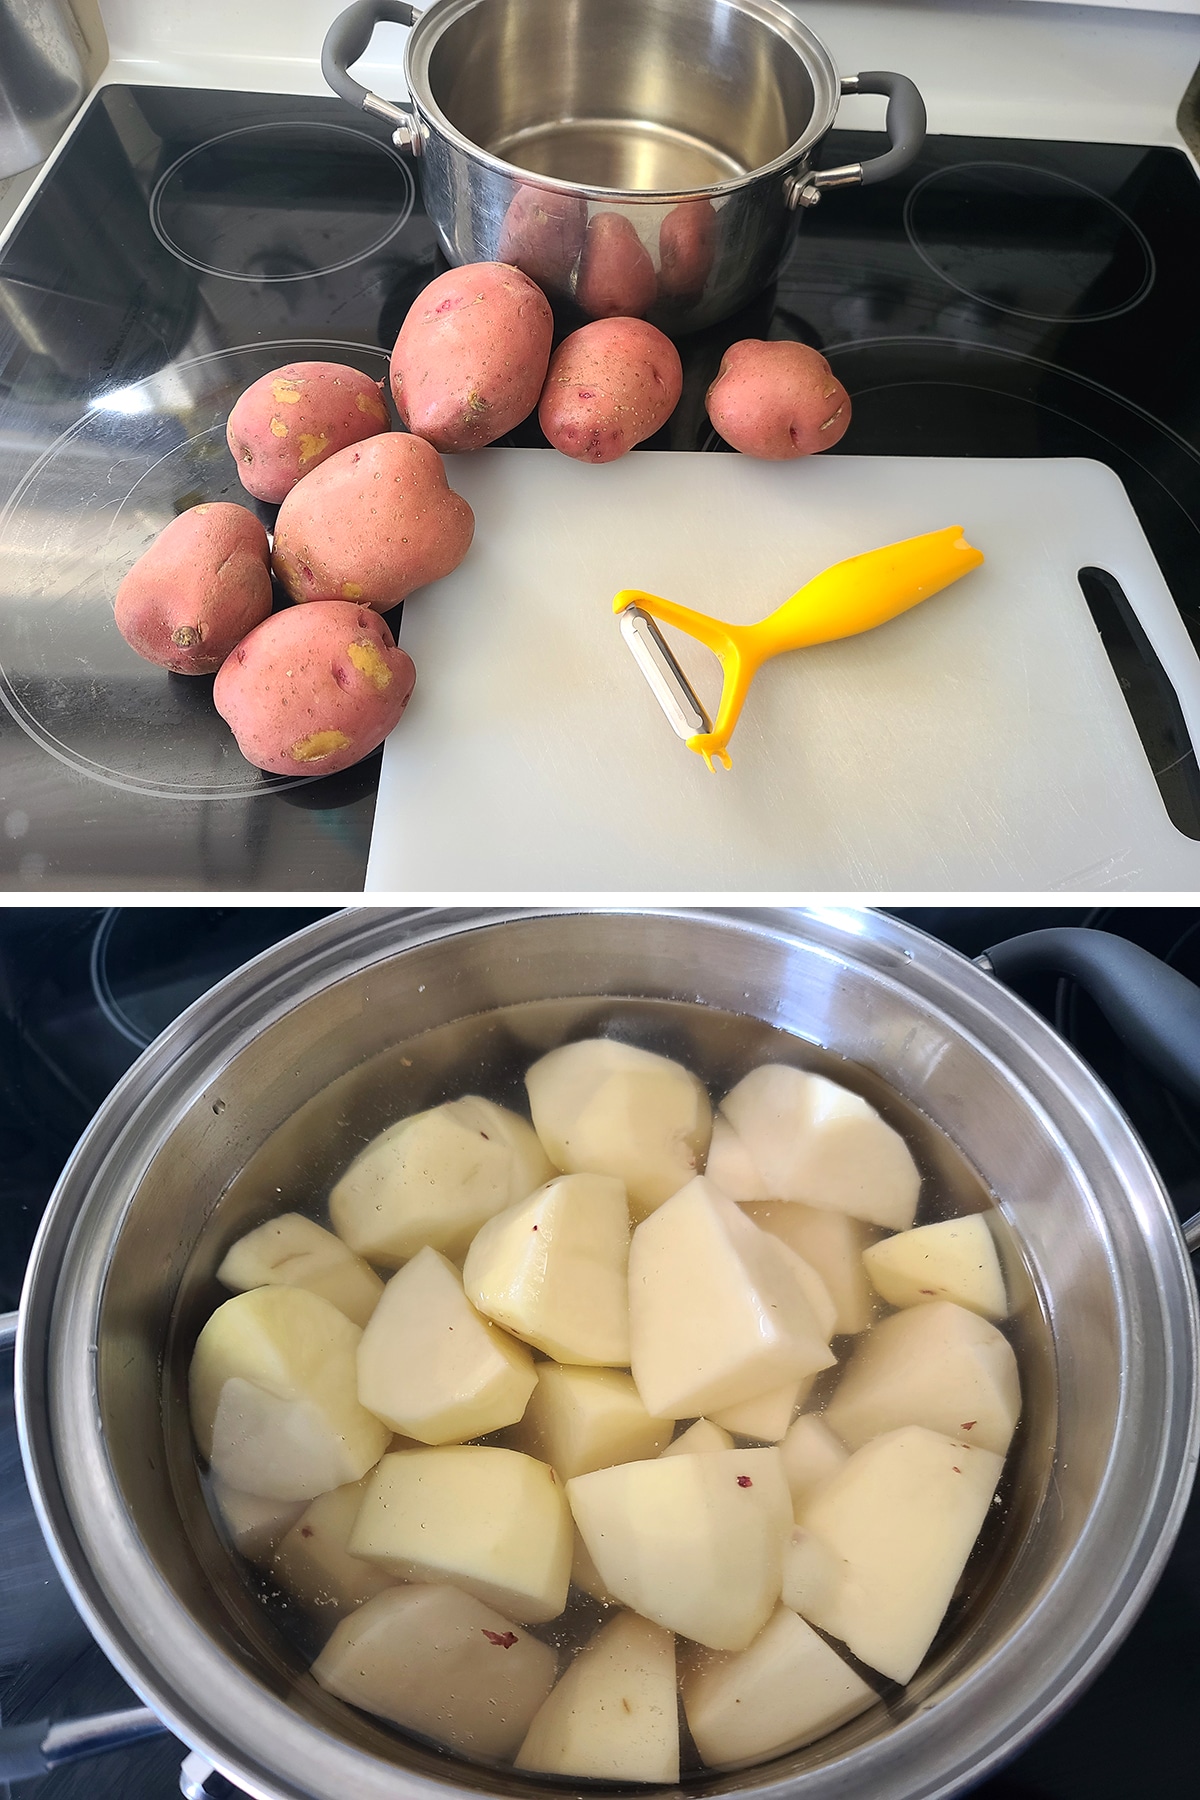 Potatoes on a cutting board, then peeled and cut up in a pot of water.